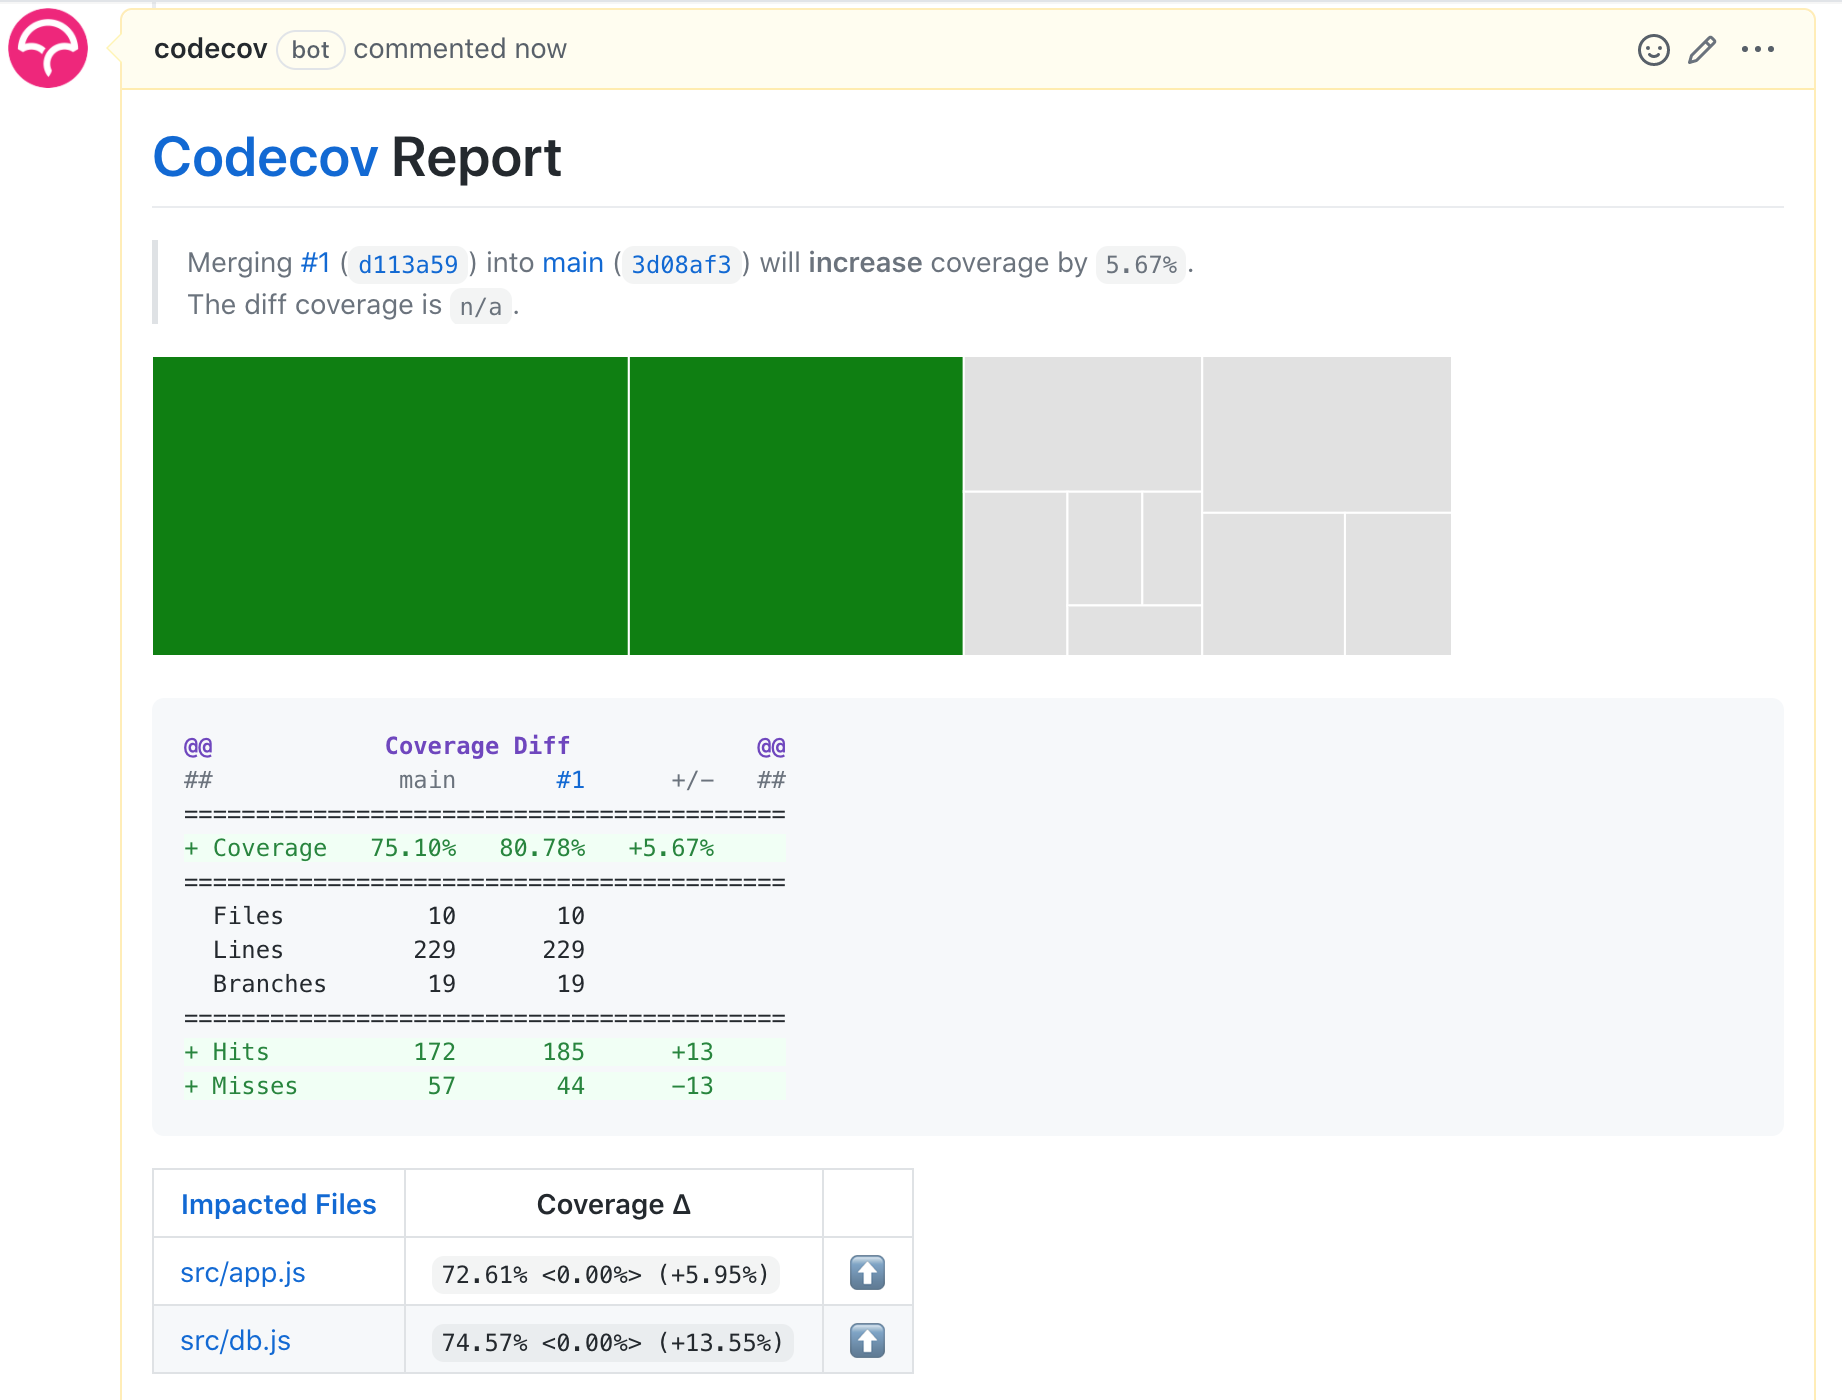 Code coverage details comment posted by Codecov